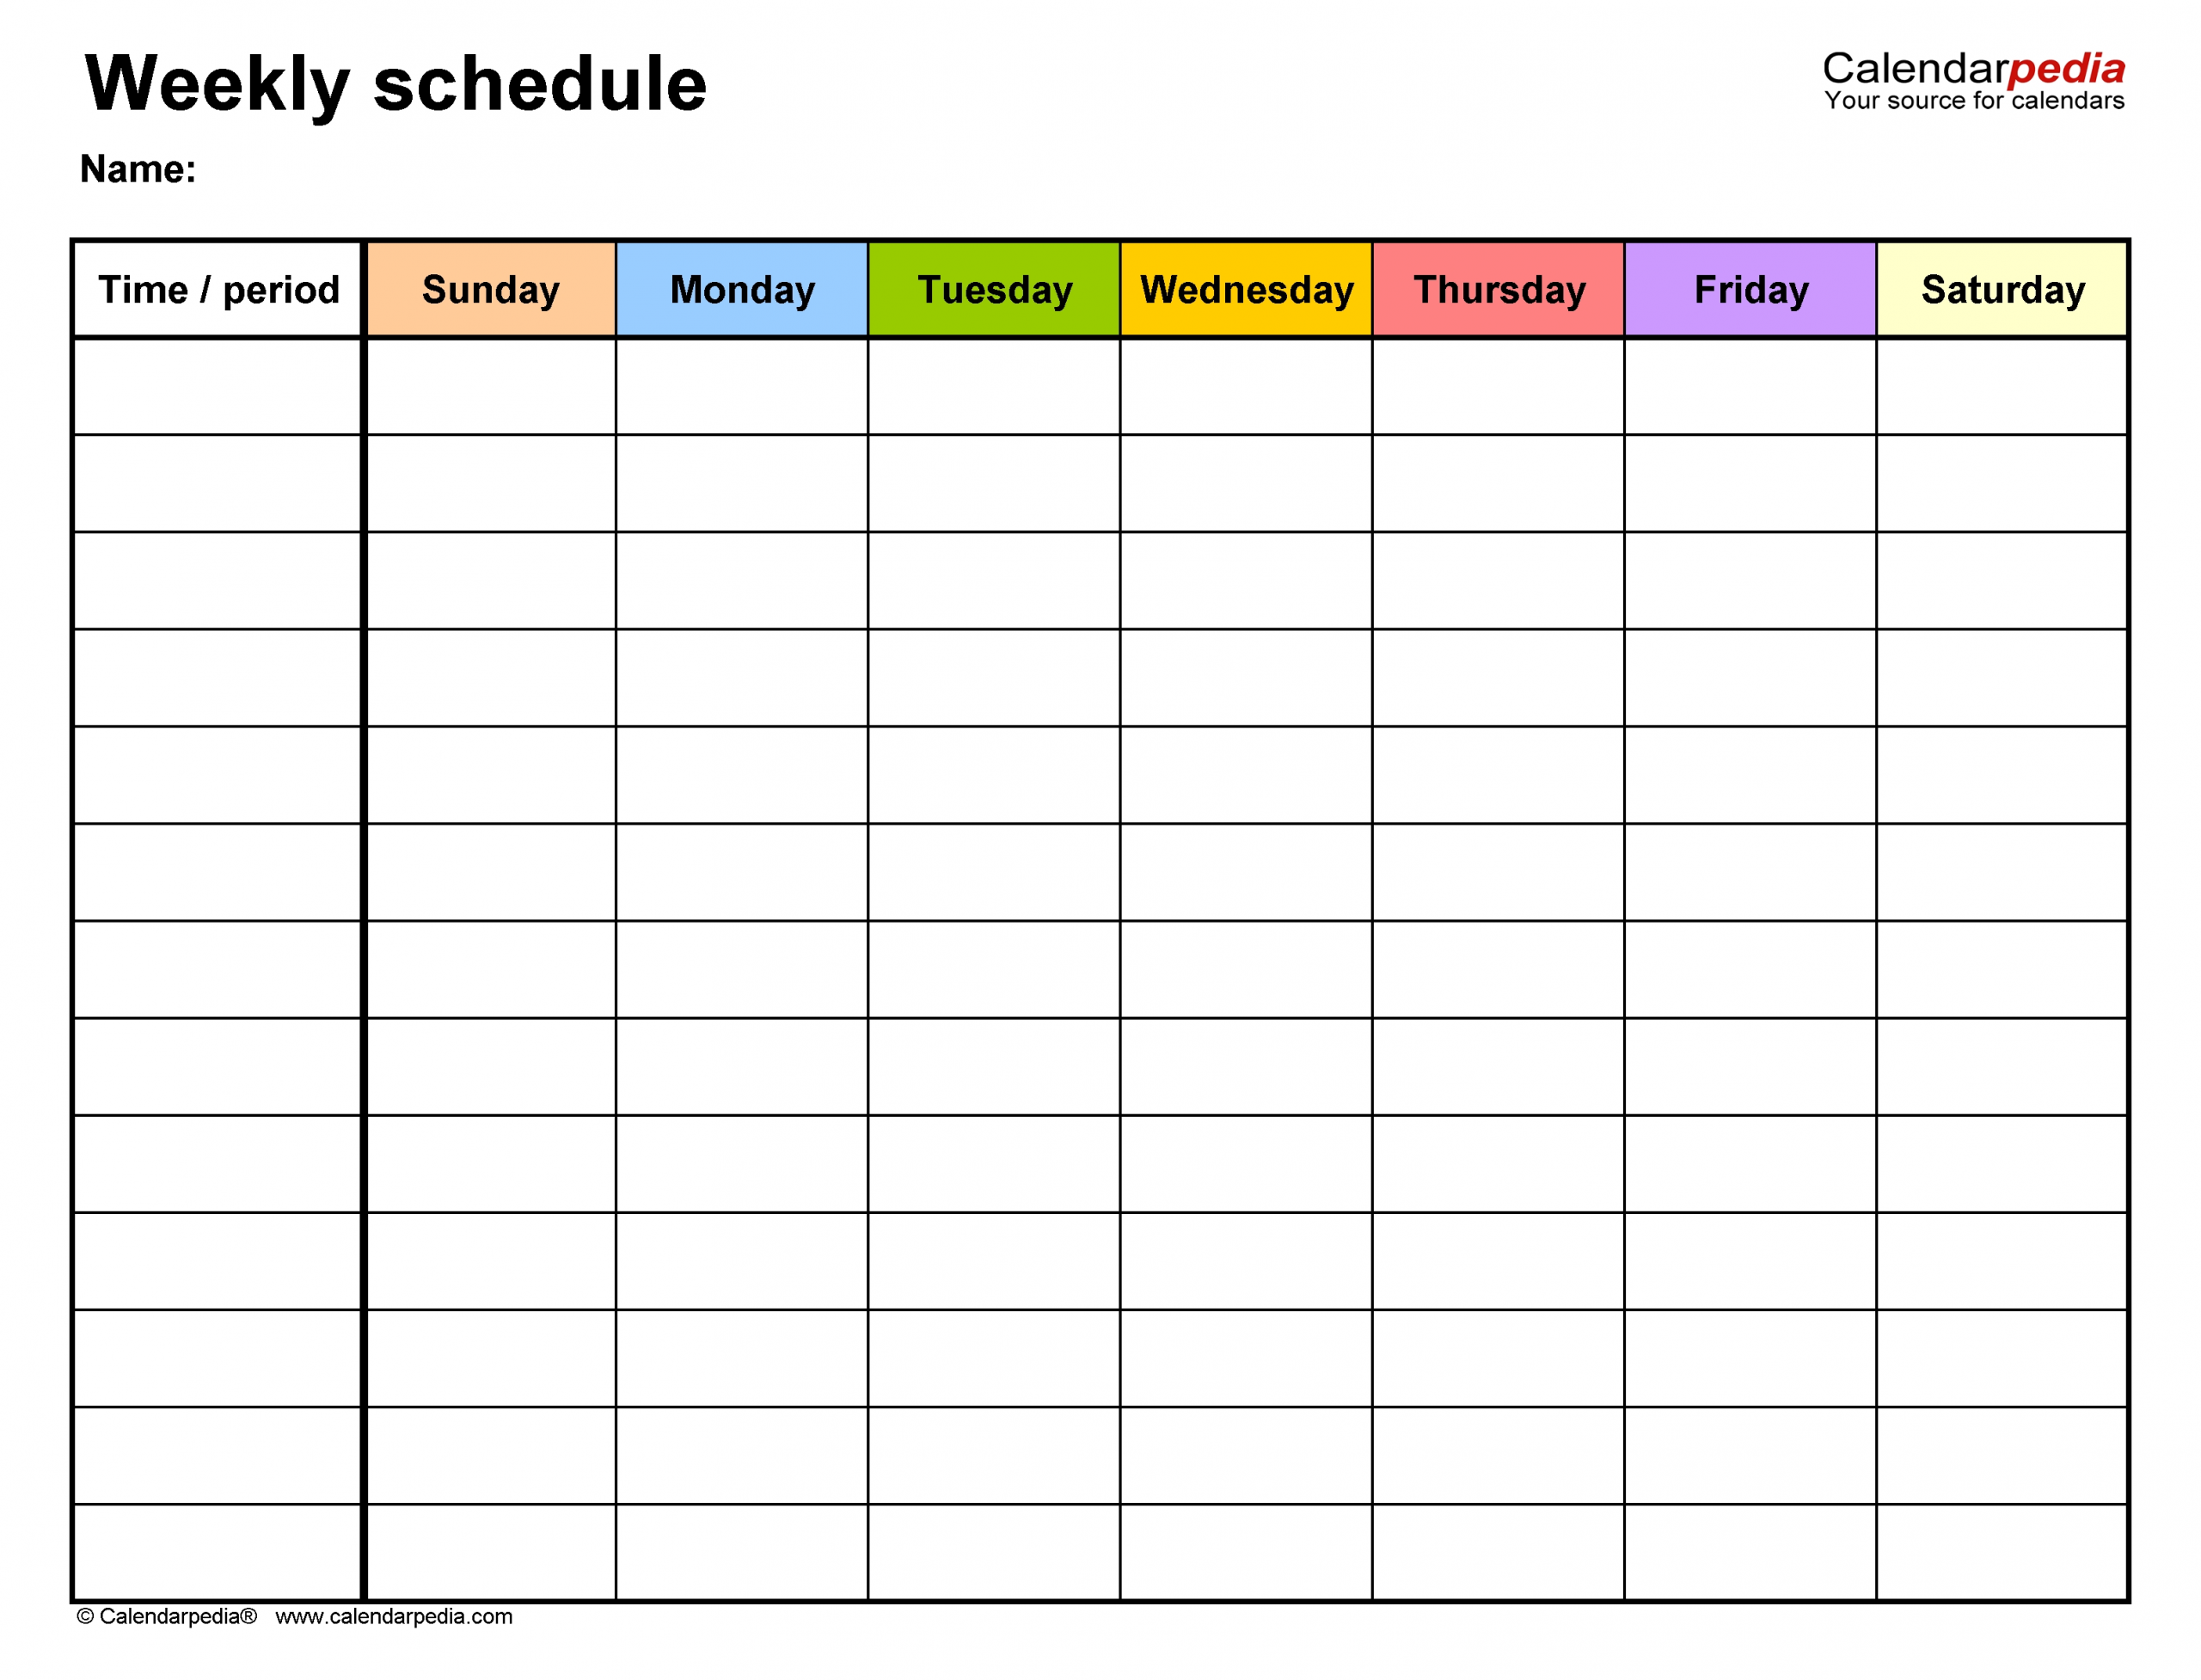 Free Weekly Schedule Templates For Word - 18 Templates  Free Printable Weekly Time Calendar